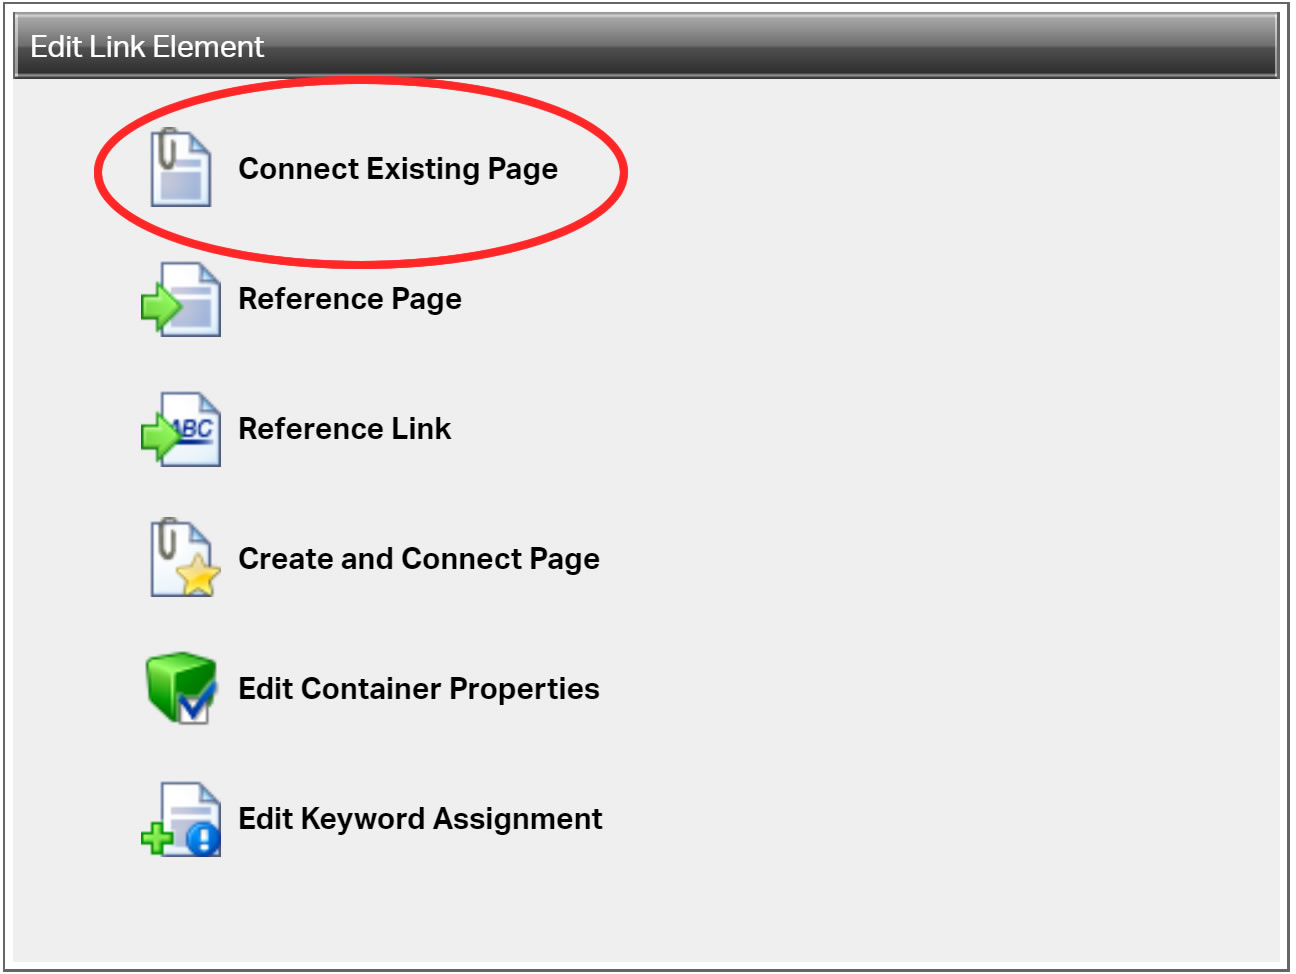 Connect to Existing Page option is circled in red